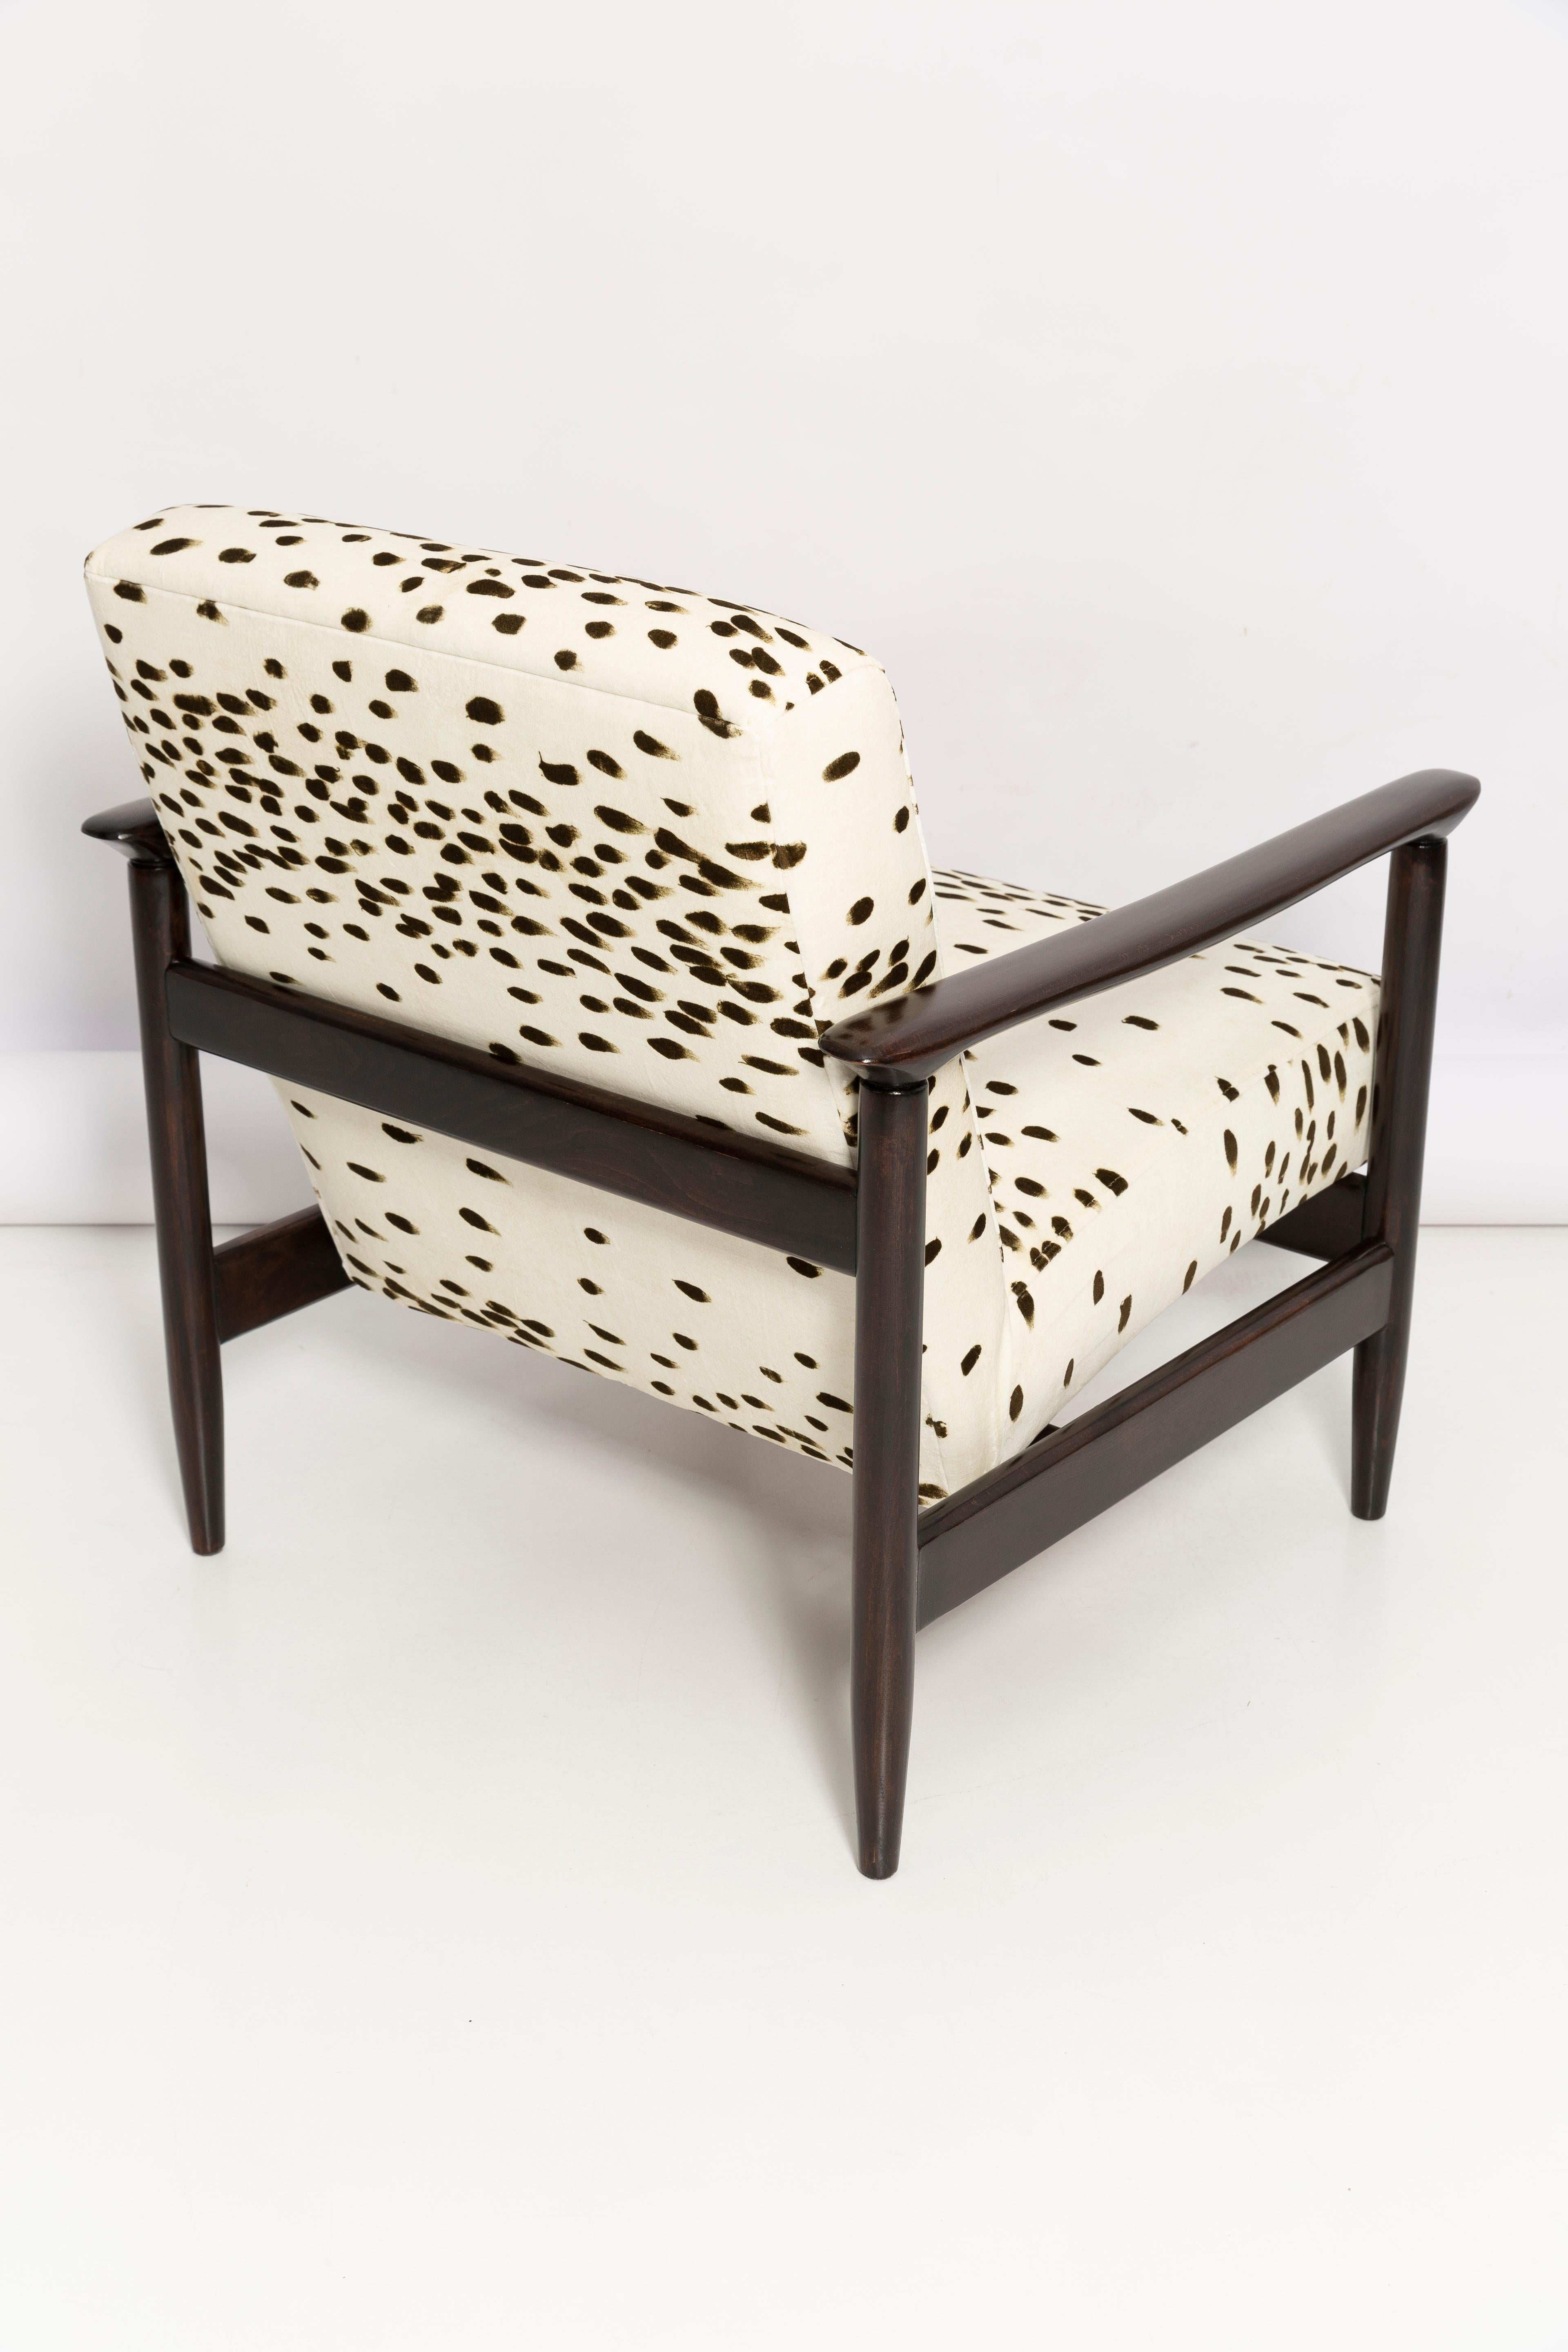 Set of Two Mid Century Dalmatian Velvet Armchairs, by Edmund Homa, Europe, 1960s For Sale 8